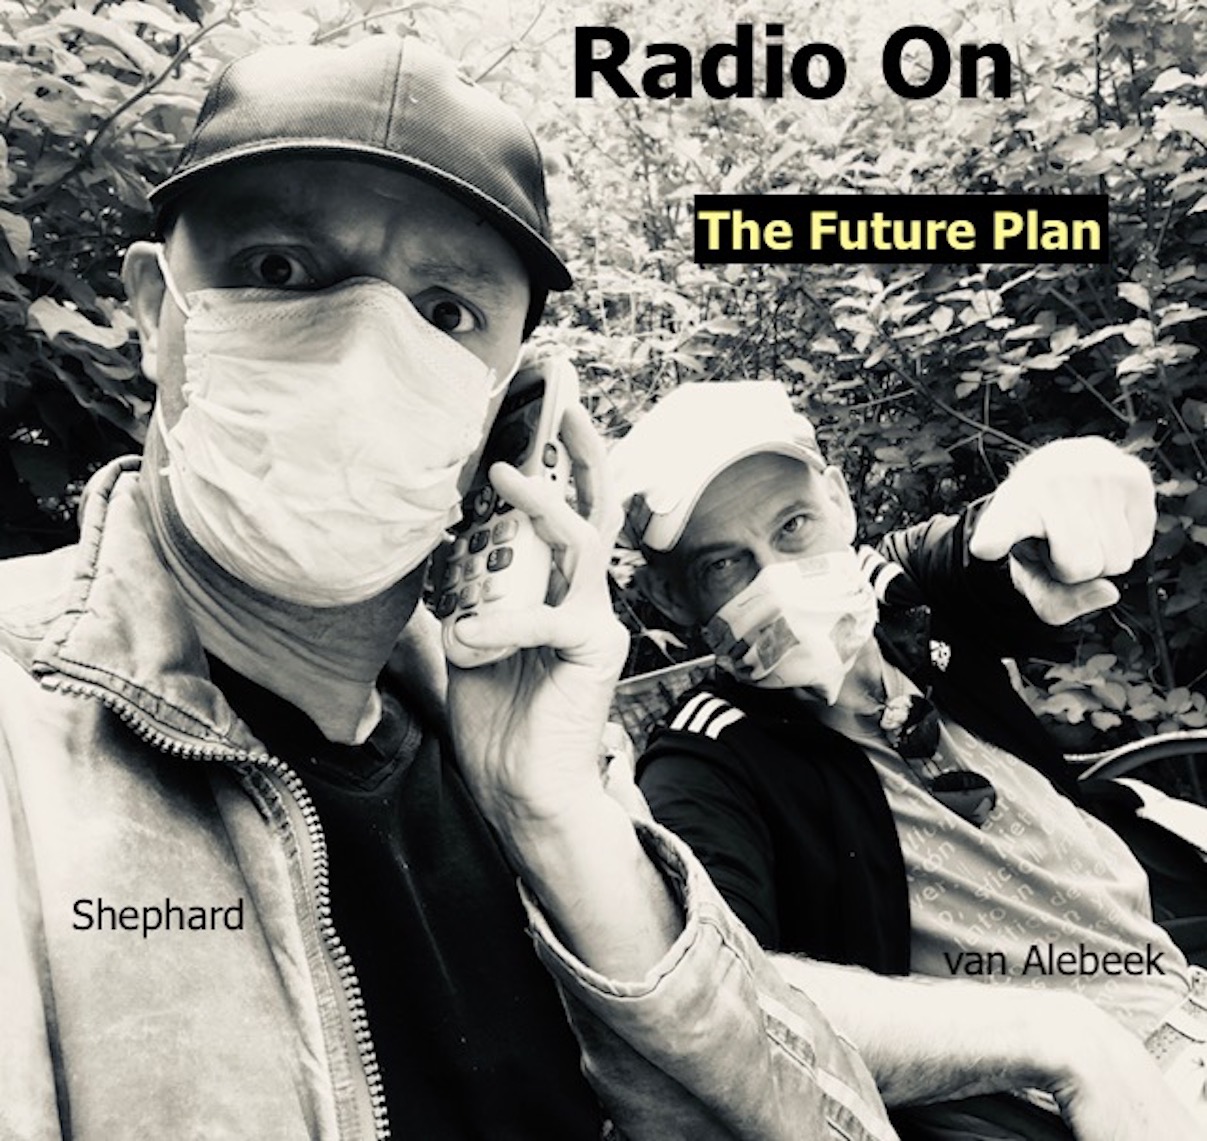 Radio On – The future plan (out of it)